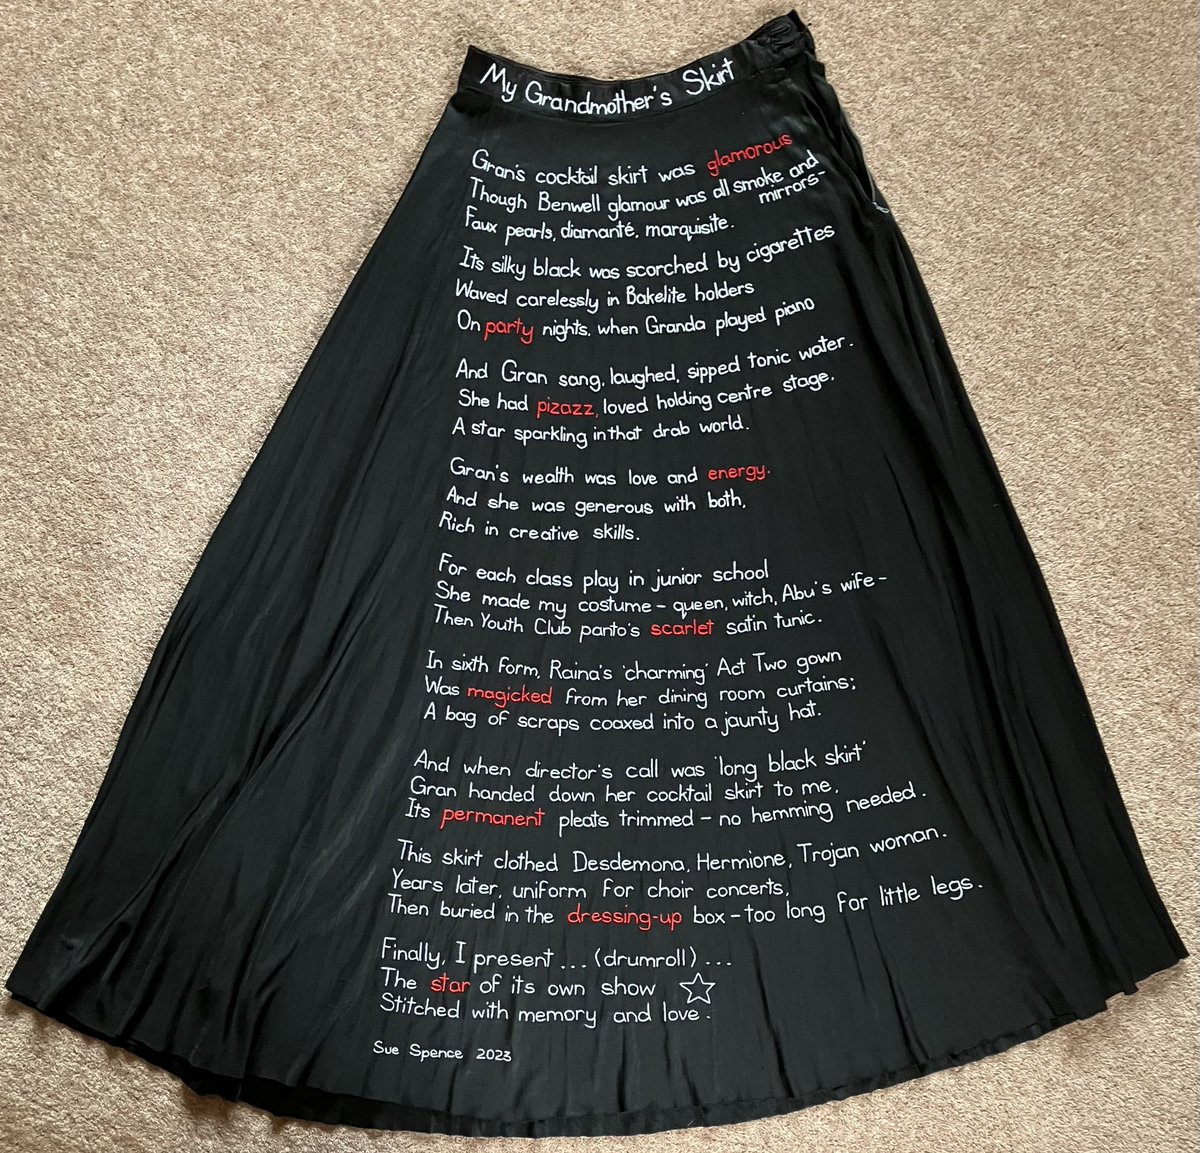 For those of you who were following the story of My Grandmother’s Skirt, I’ve just finished stitching this little postscript on the reverse. Project complete! 🖤